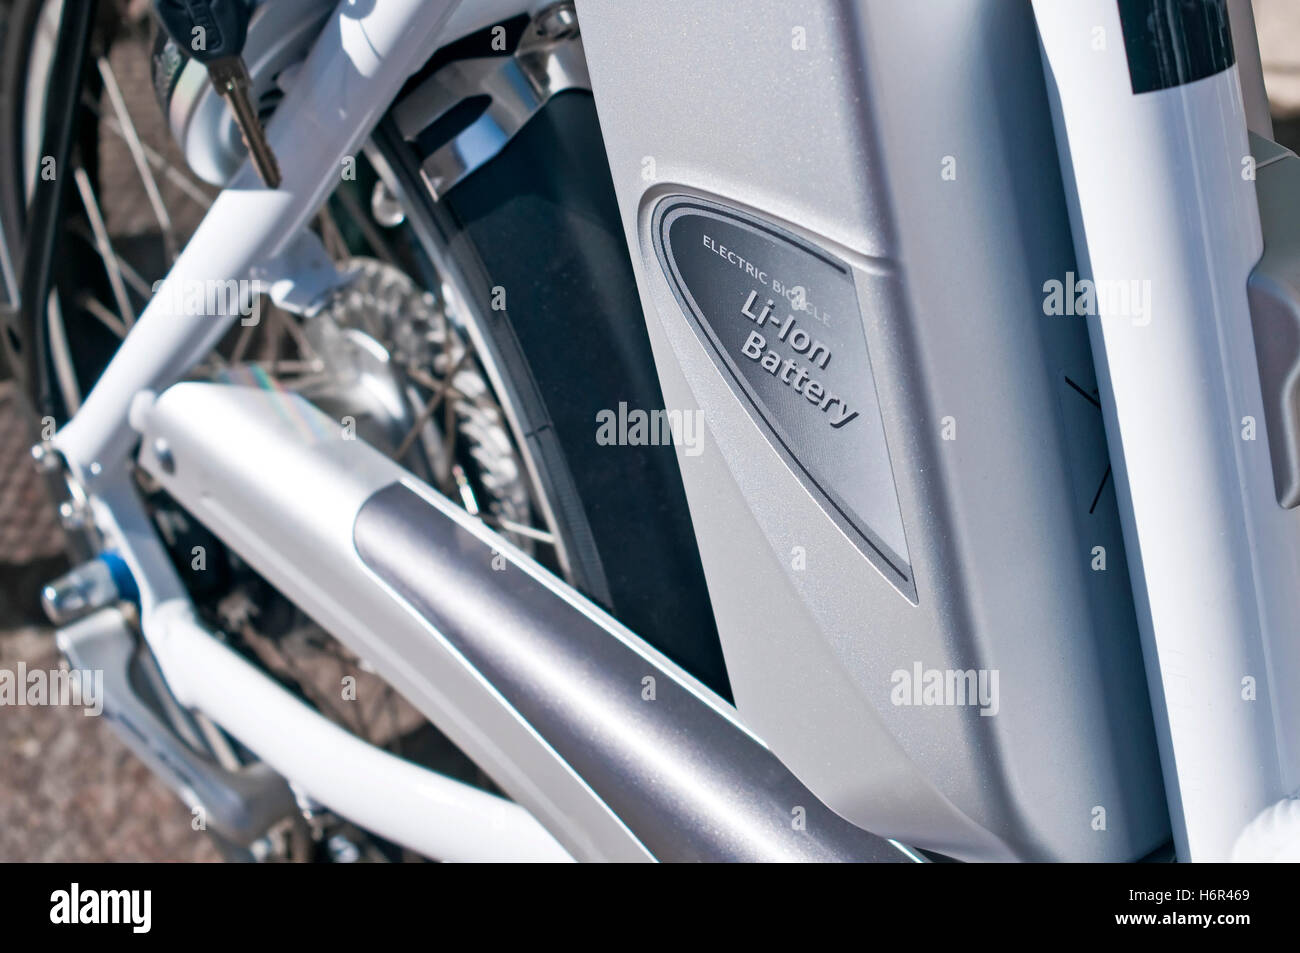 electric bicycle Stock Photo